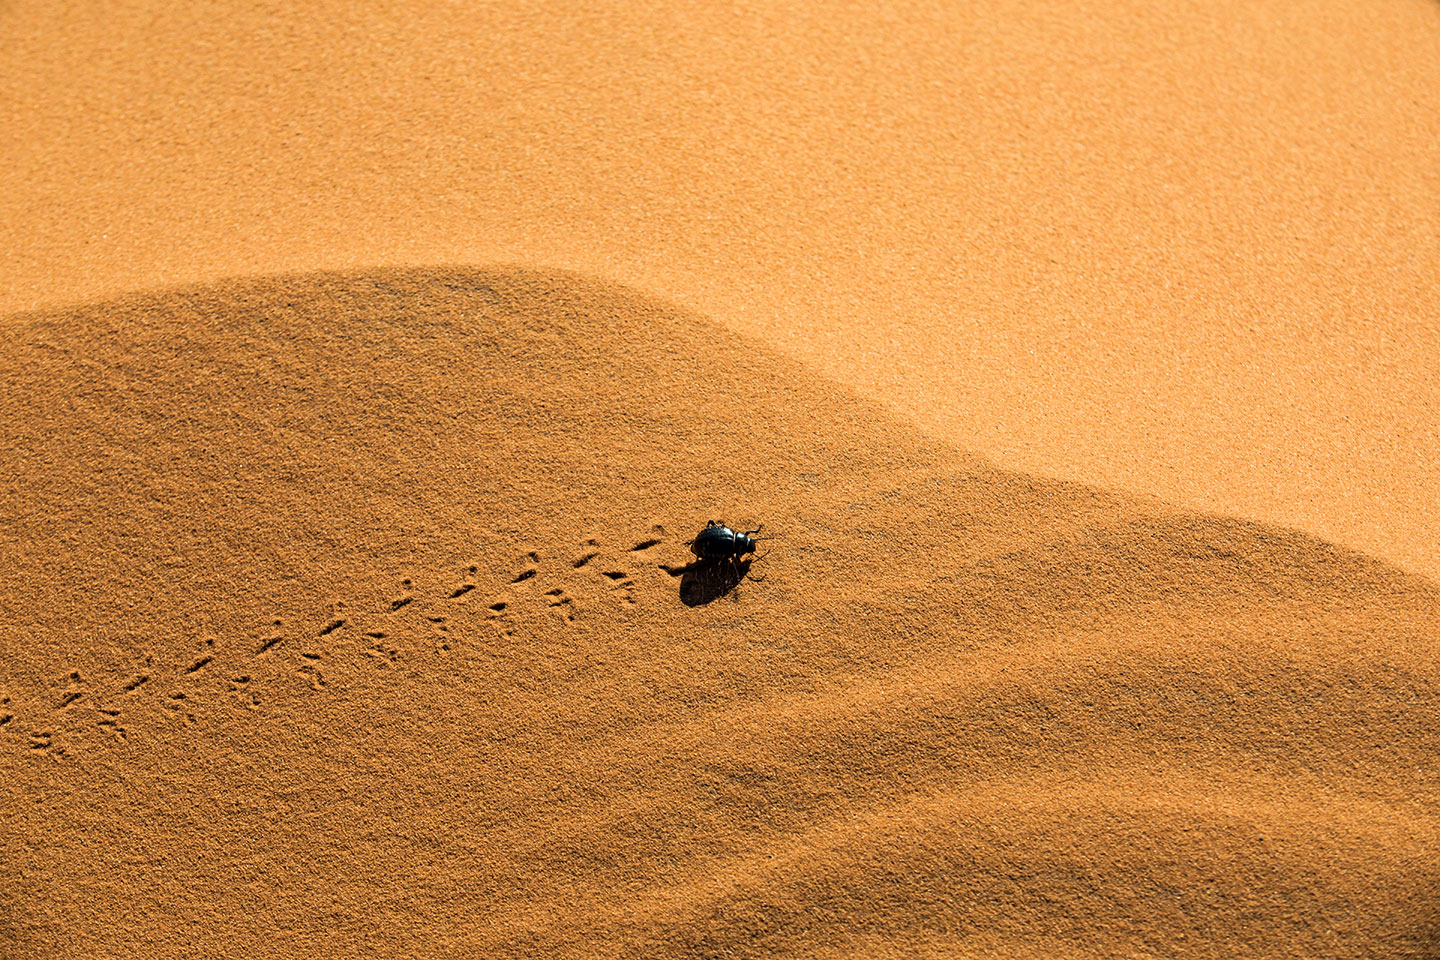 Beetle in the sand of the Sahara desert in Morocco